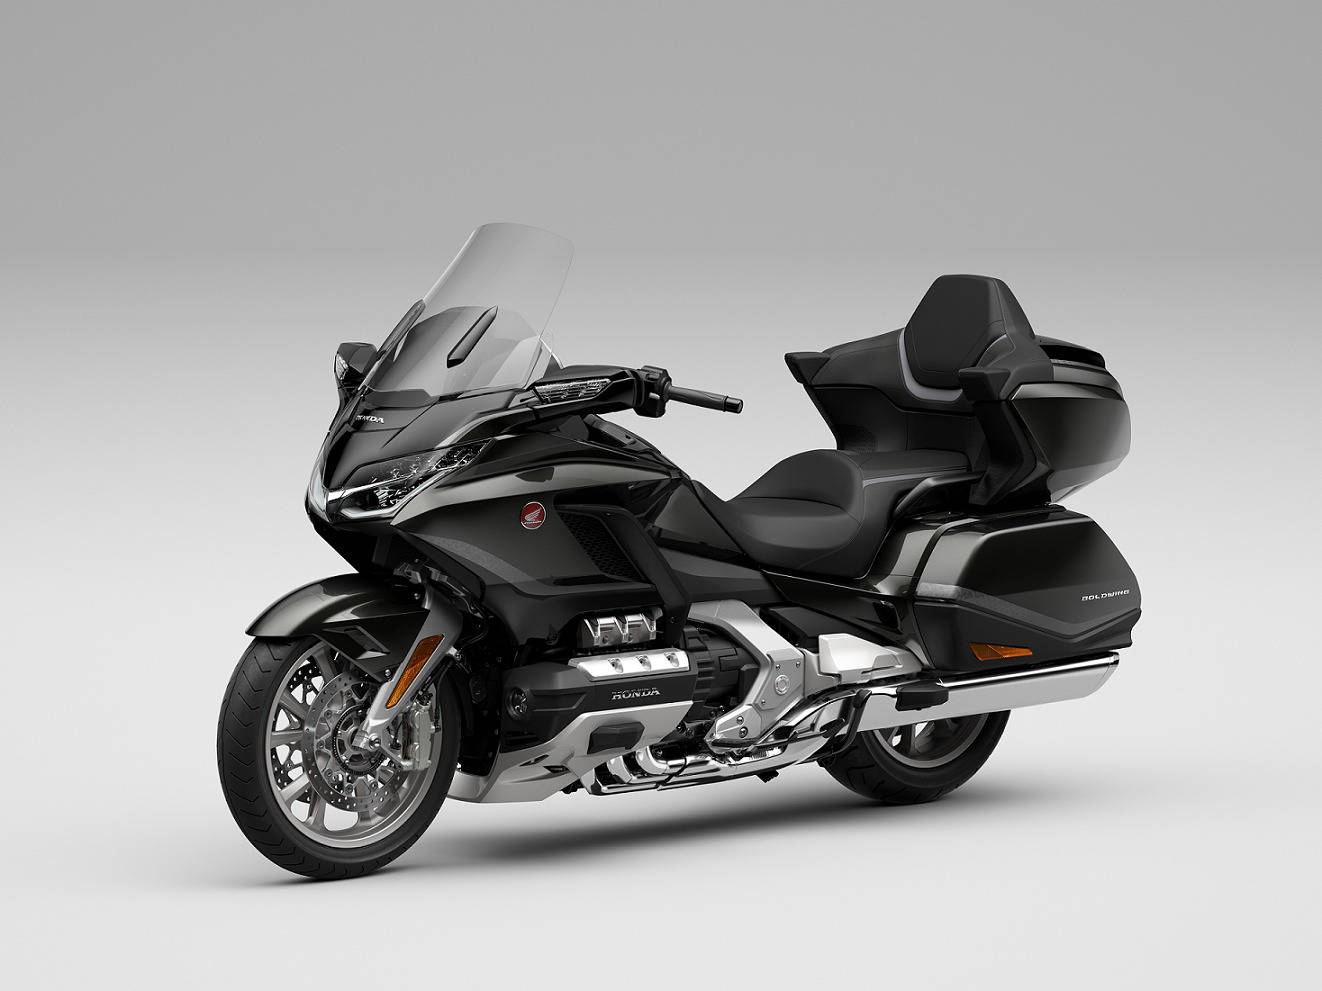 Honda Gold Wing Tour 21 Honda Gold Wing Tour Launched In India At Rs 37 Lakh Times Of India